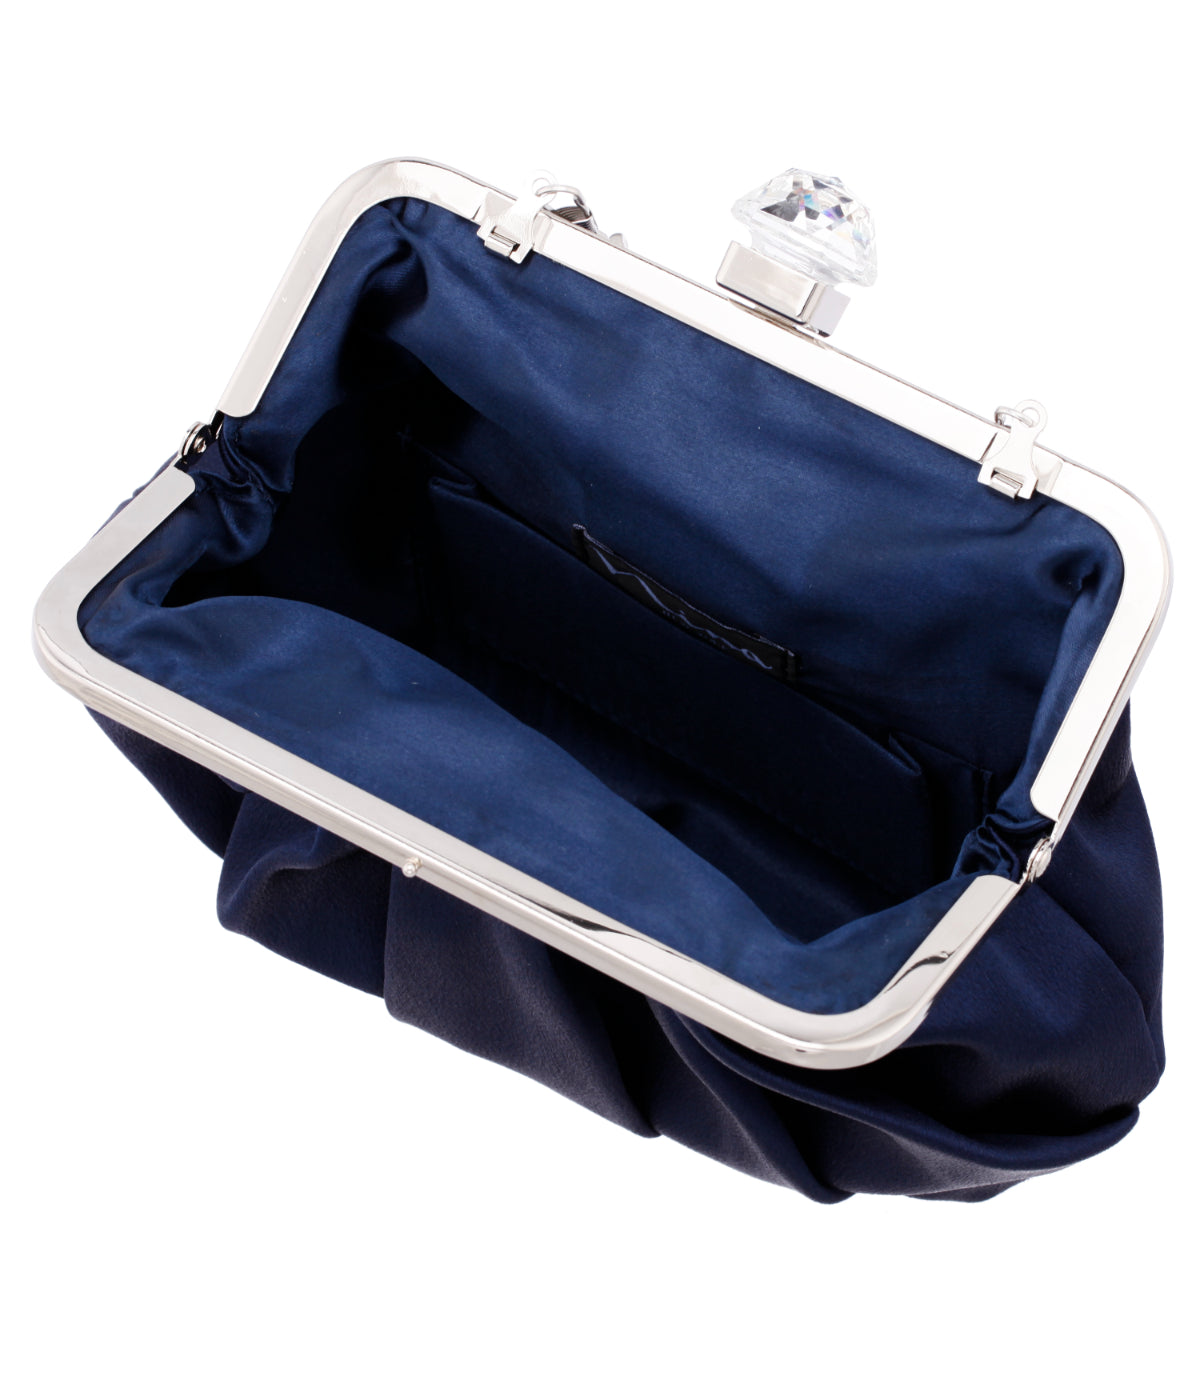 Gillis Pleated Frame Satchel With Crystal Clasp Navy